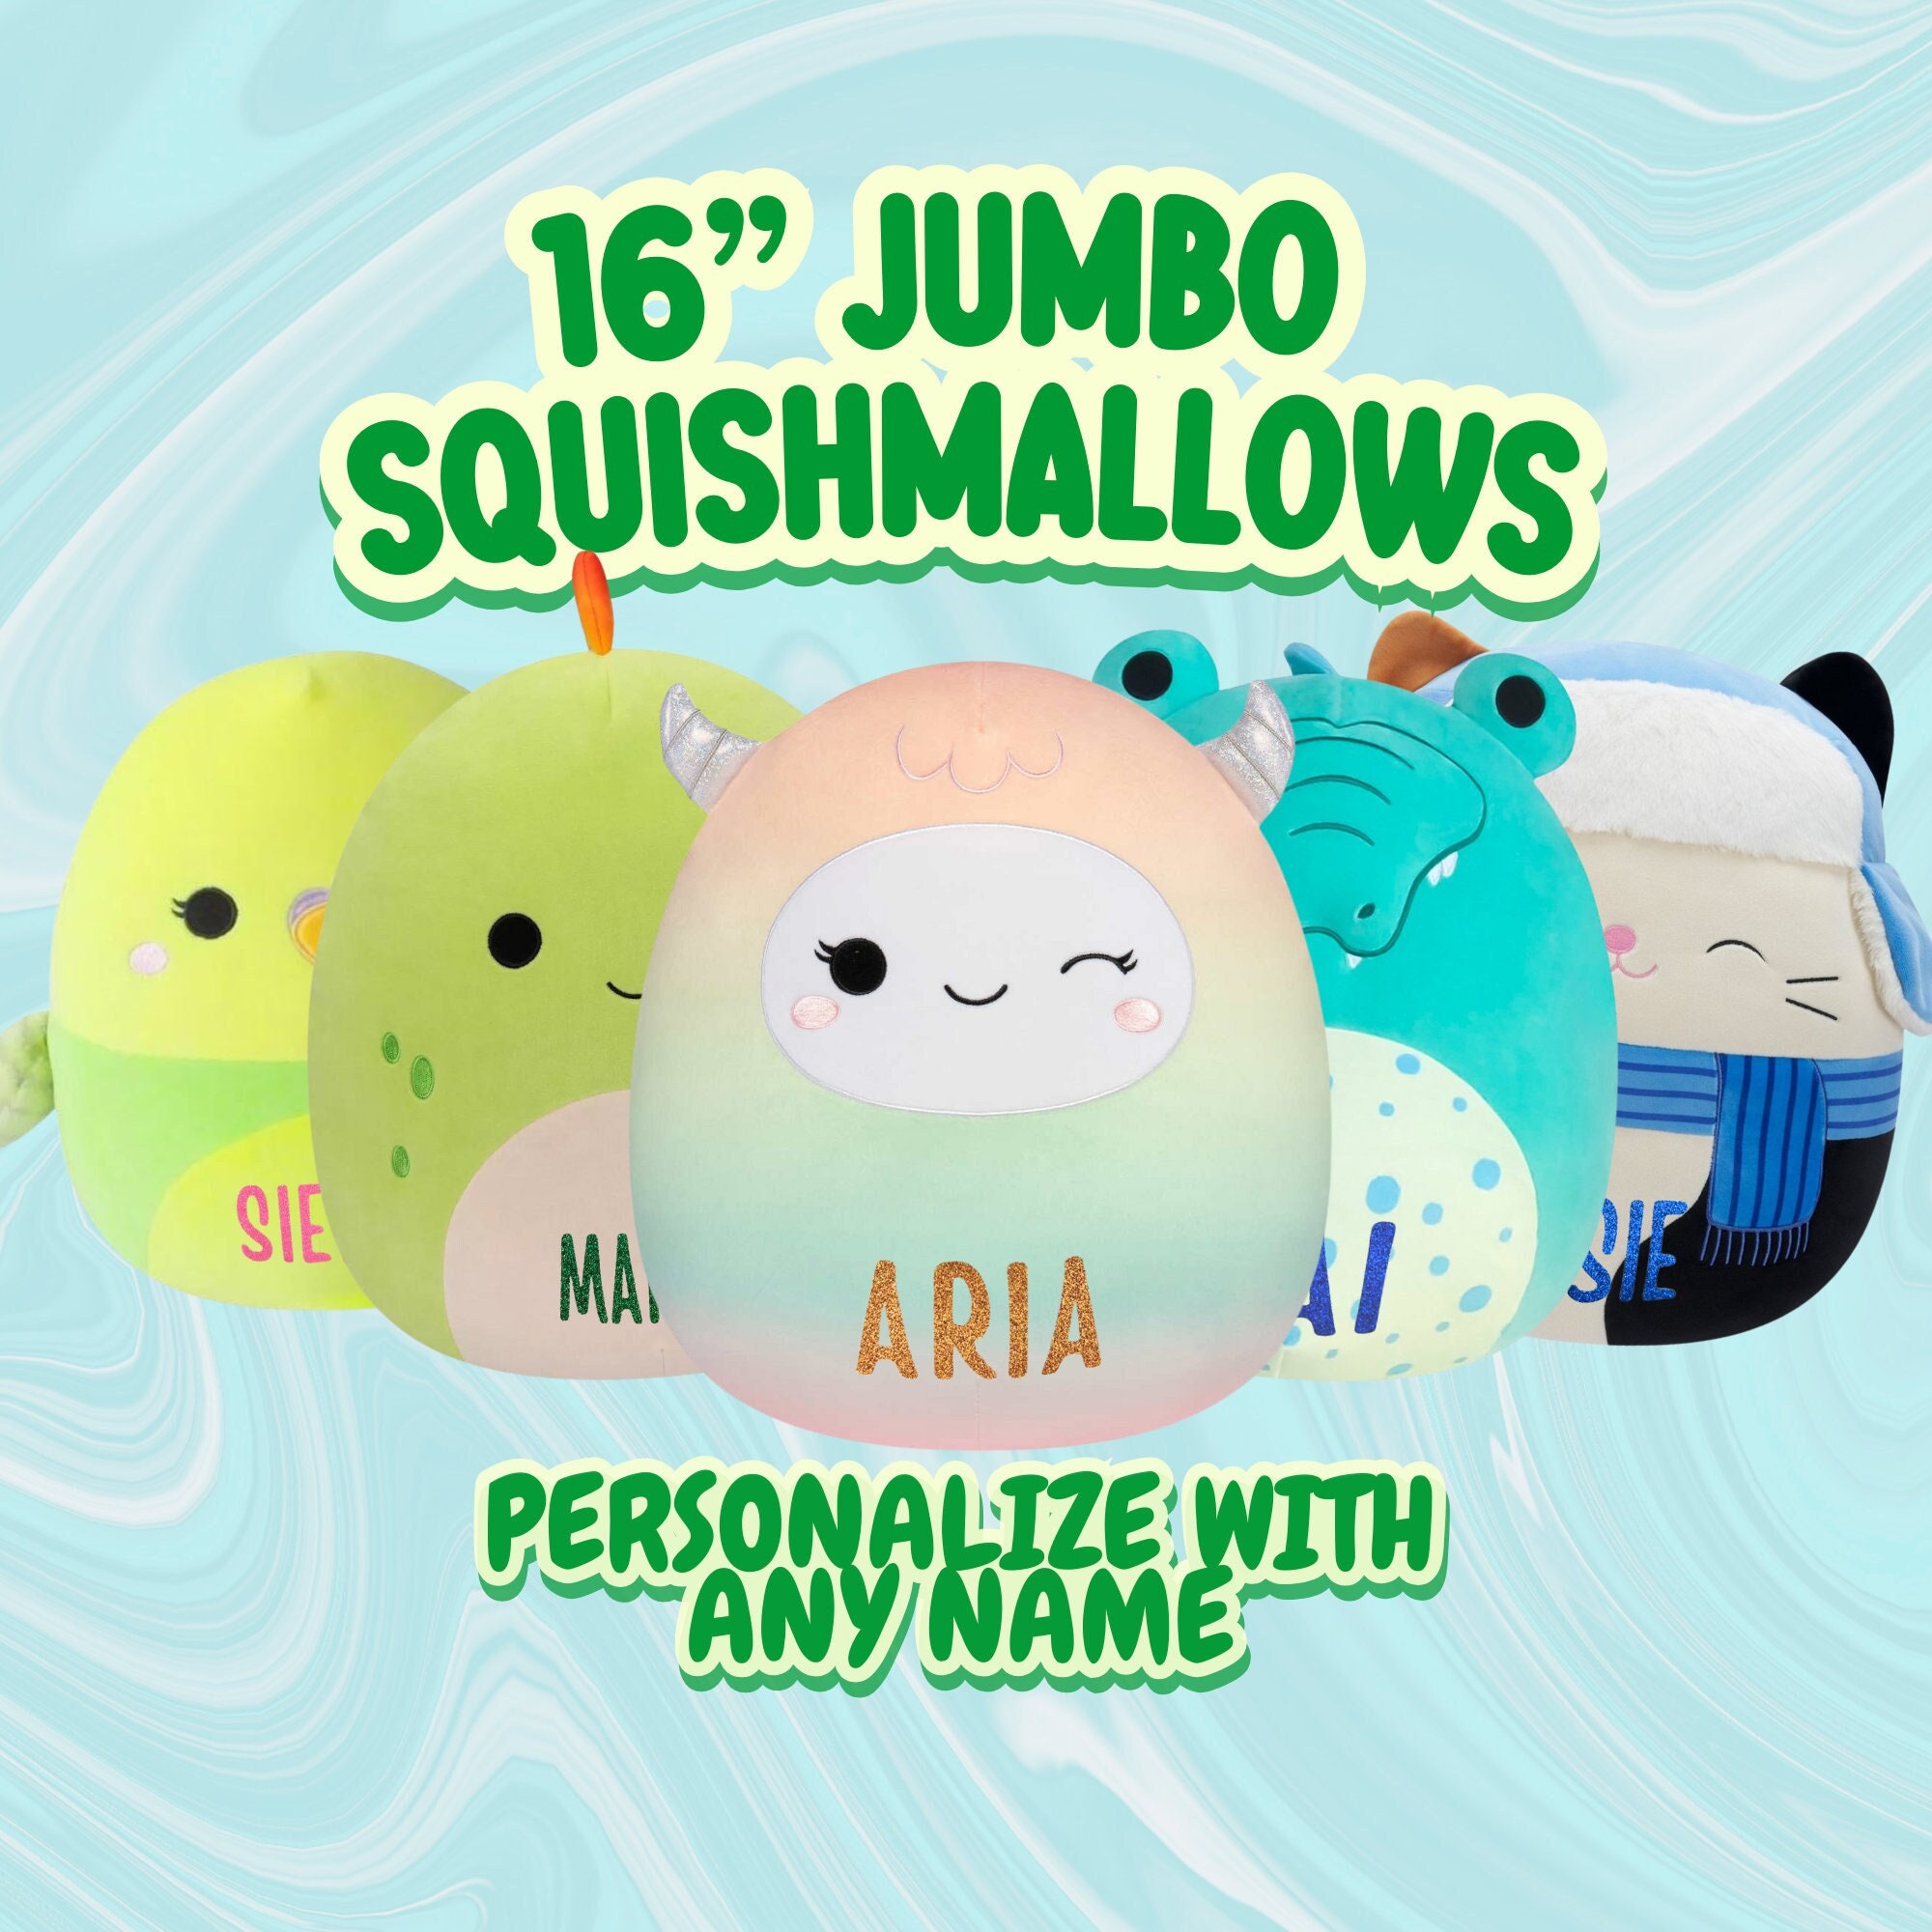 SQUISHMALLOW BUNDLE - baby & kid stuff - by owner - household sale -  craigslist